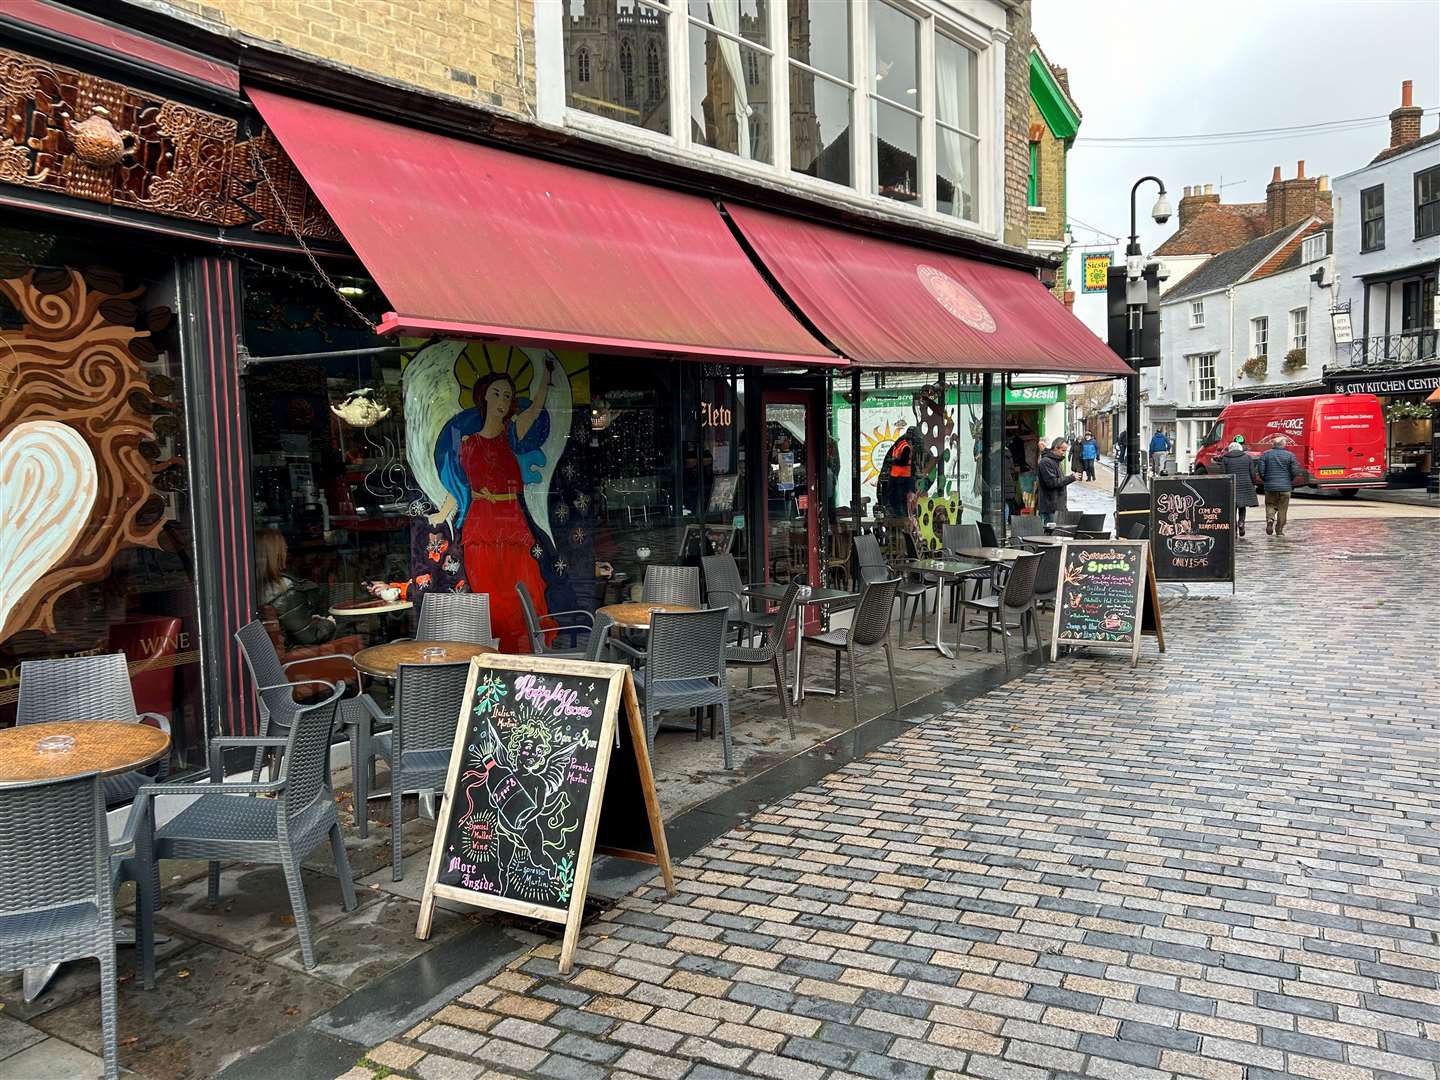 The Eleto Chocolate Cafe in Canterbury has closed